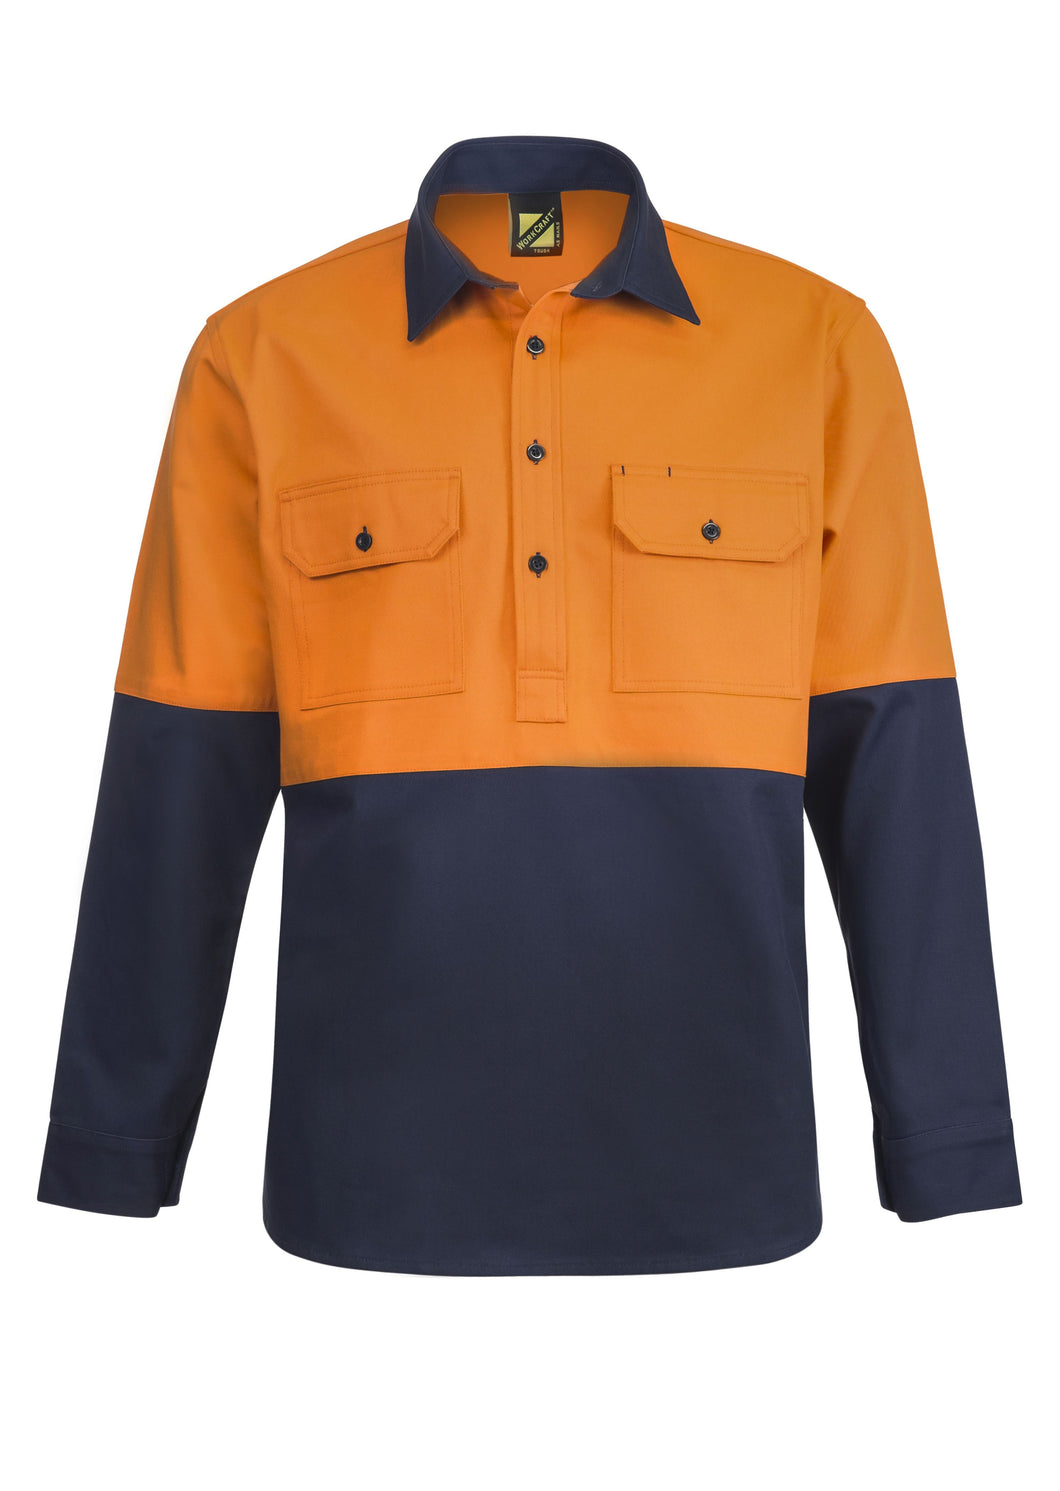 Heavy Duty Hybrid Two Tone Half Placket Cotton Drill Shirt with Gusset Sleeves